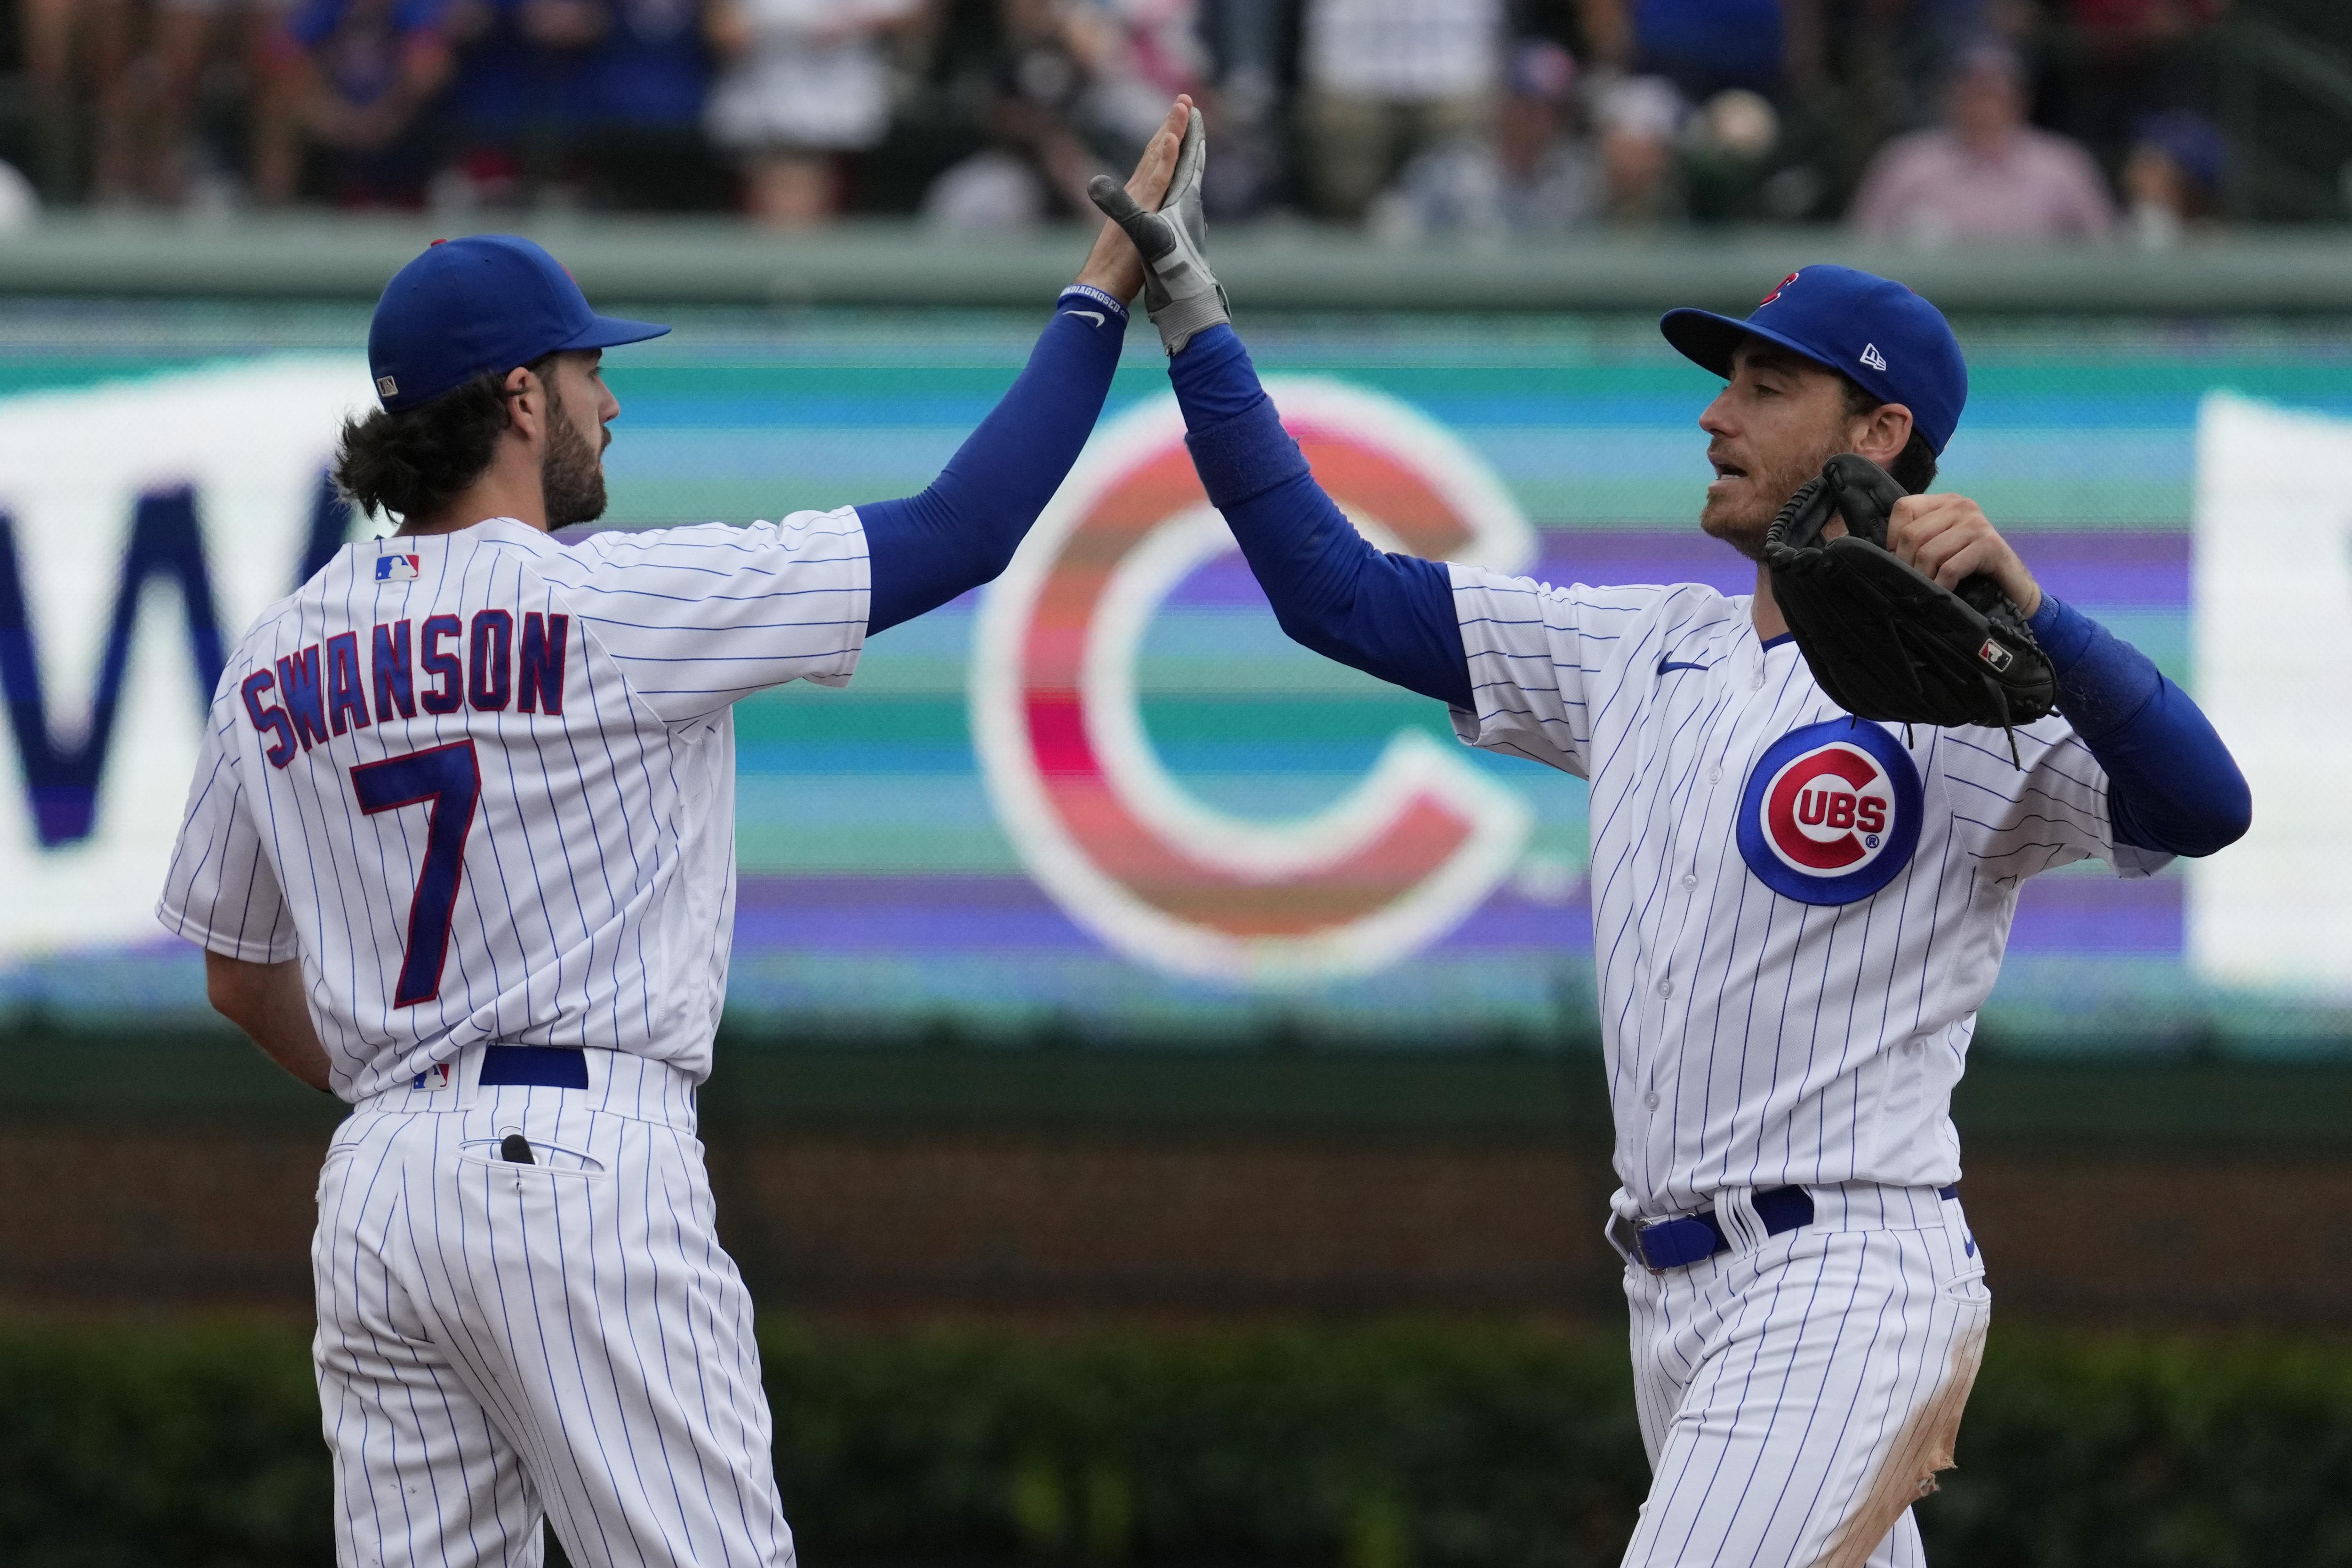 404 - Page cannot be found  Chicago sports teams, Cubs win, Cubs